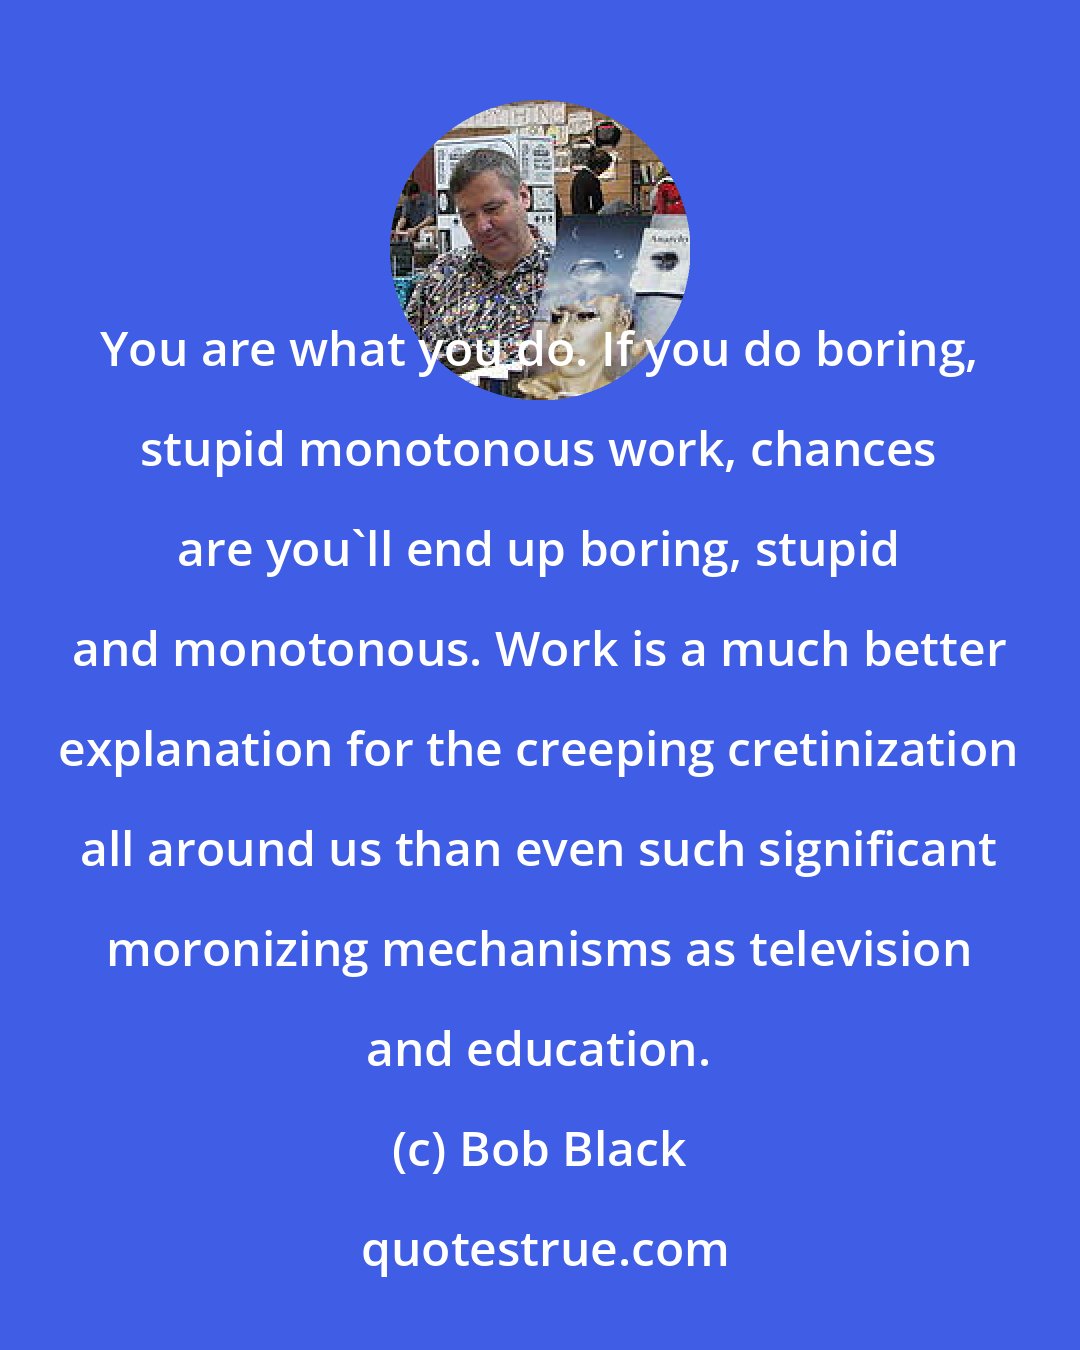 Bob Black: You are what you do. If you do boring, stupid monotonous work, chances are you'll end up boring, stupid and monotonous. Work is a much better explanation for the creeping cretinization all around us than even such significant moronizing mechanisms as television and education.